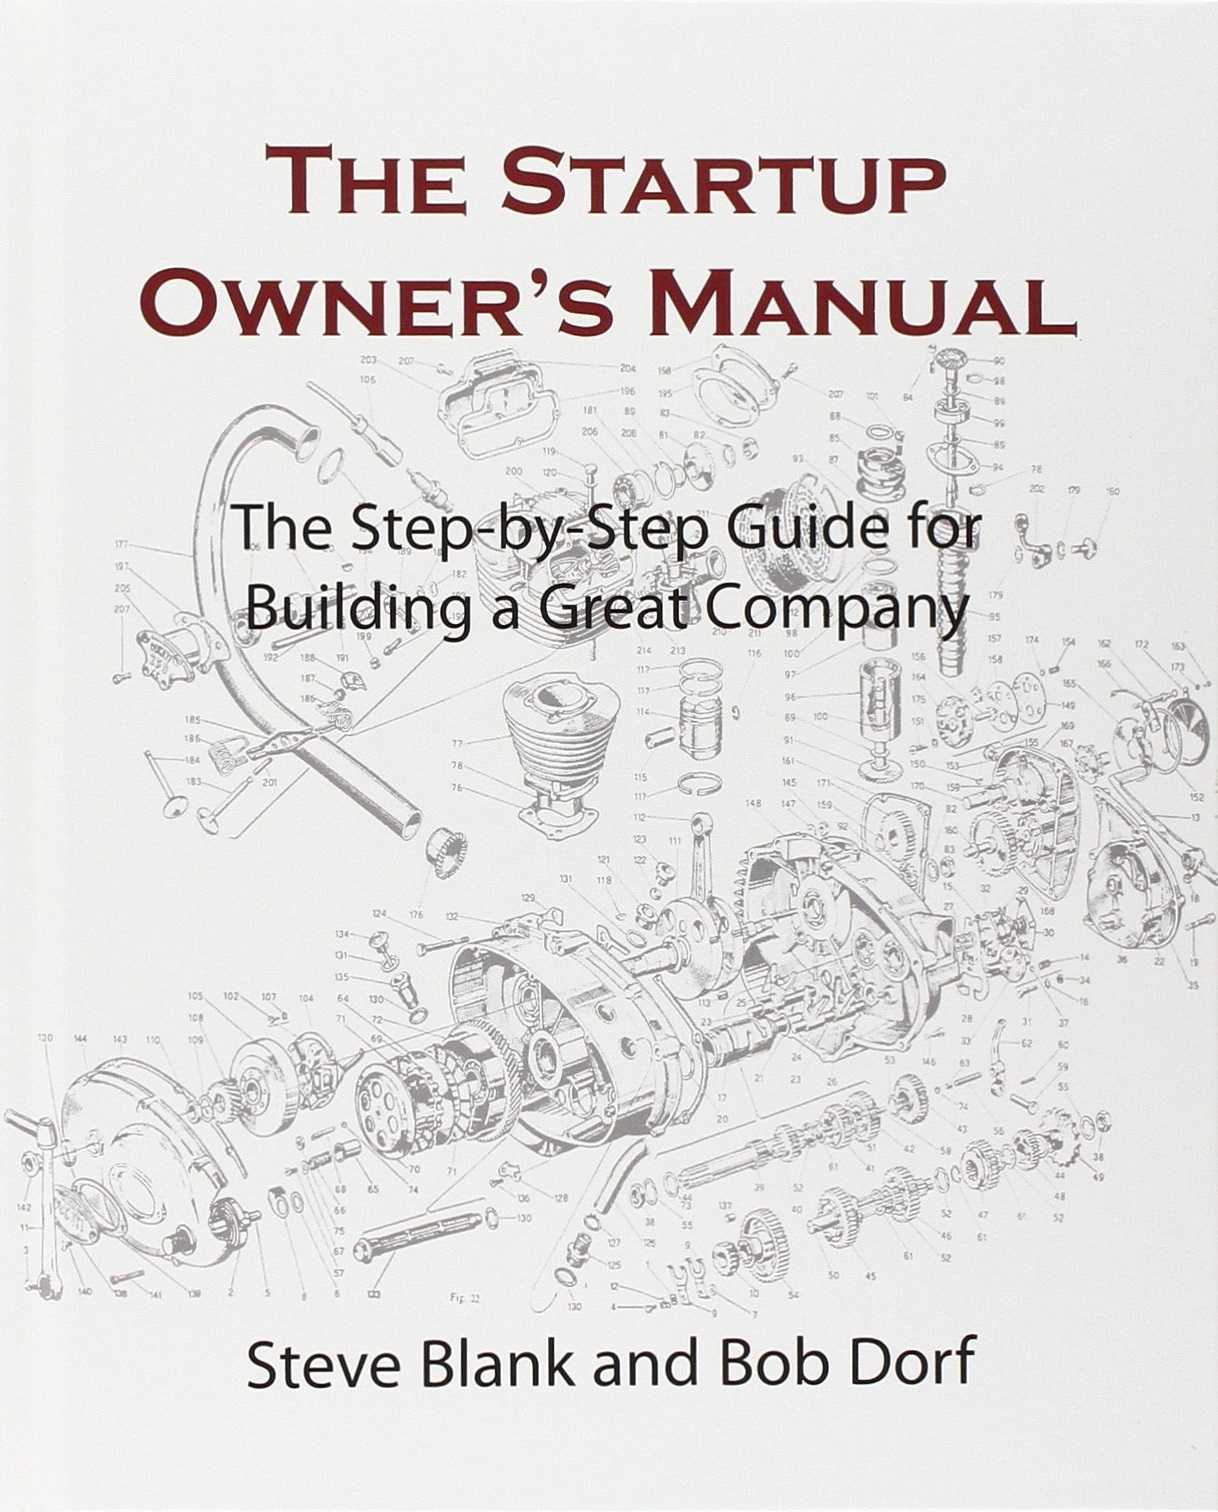 The Startup Owner's Manual: The Step-By-Step Guide for Building a Great Company